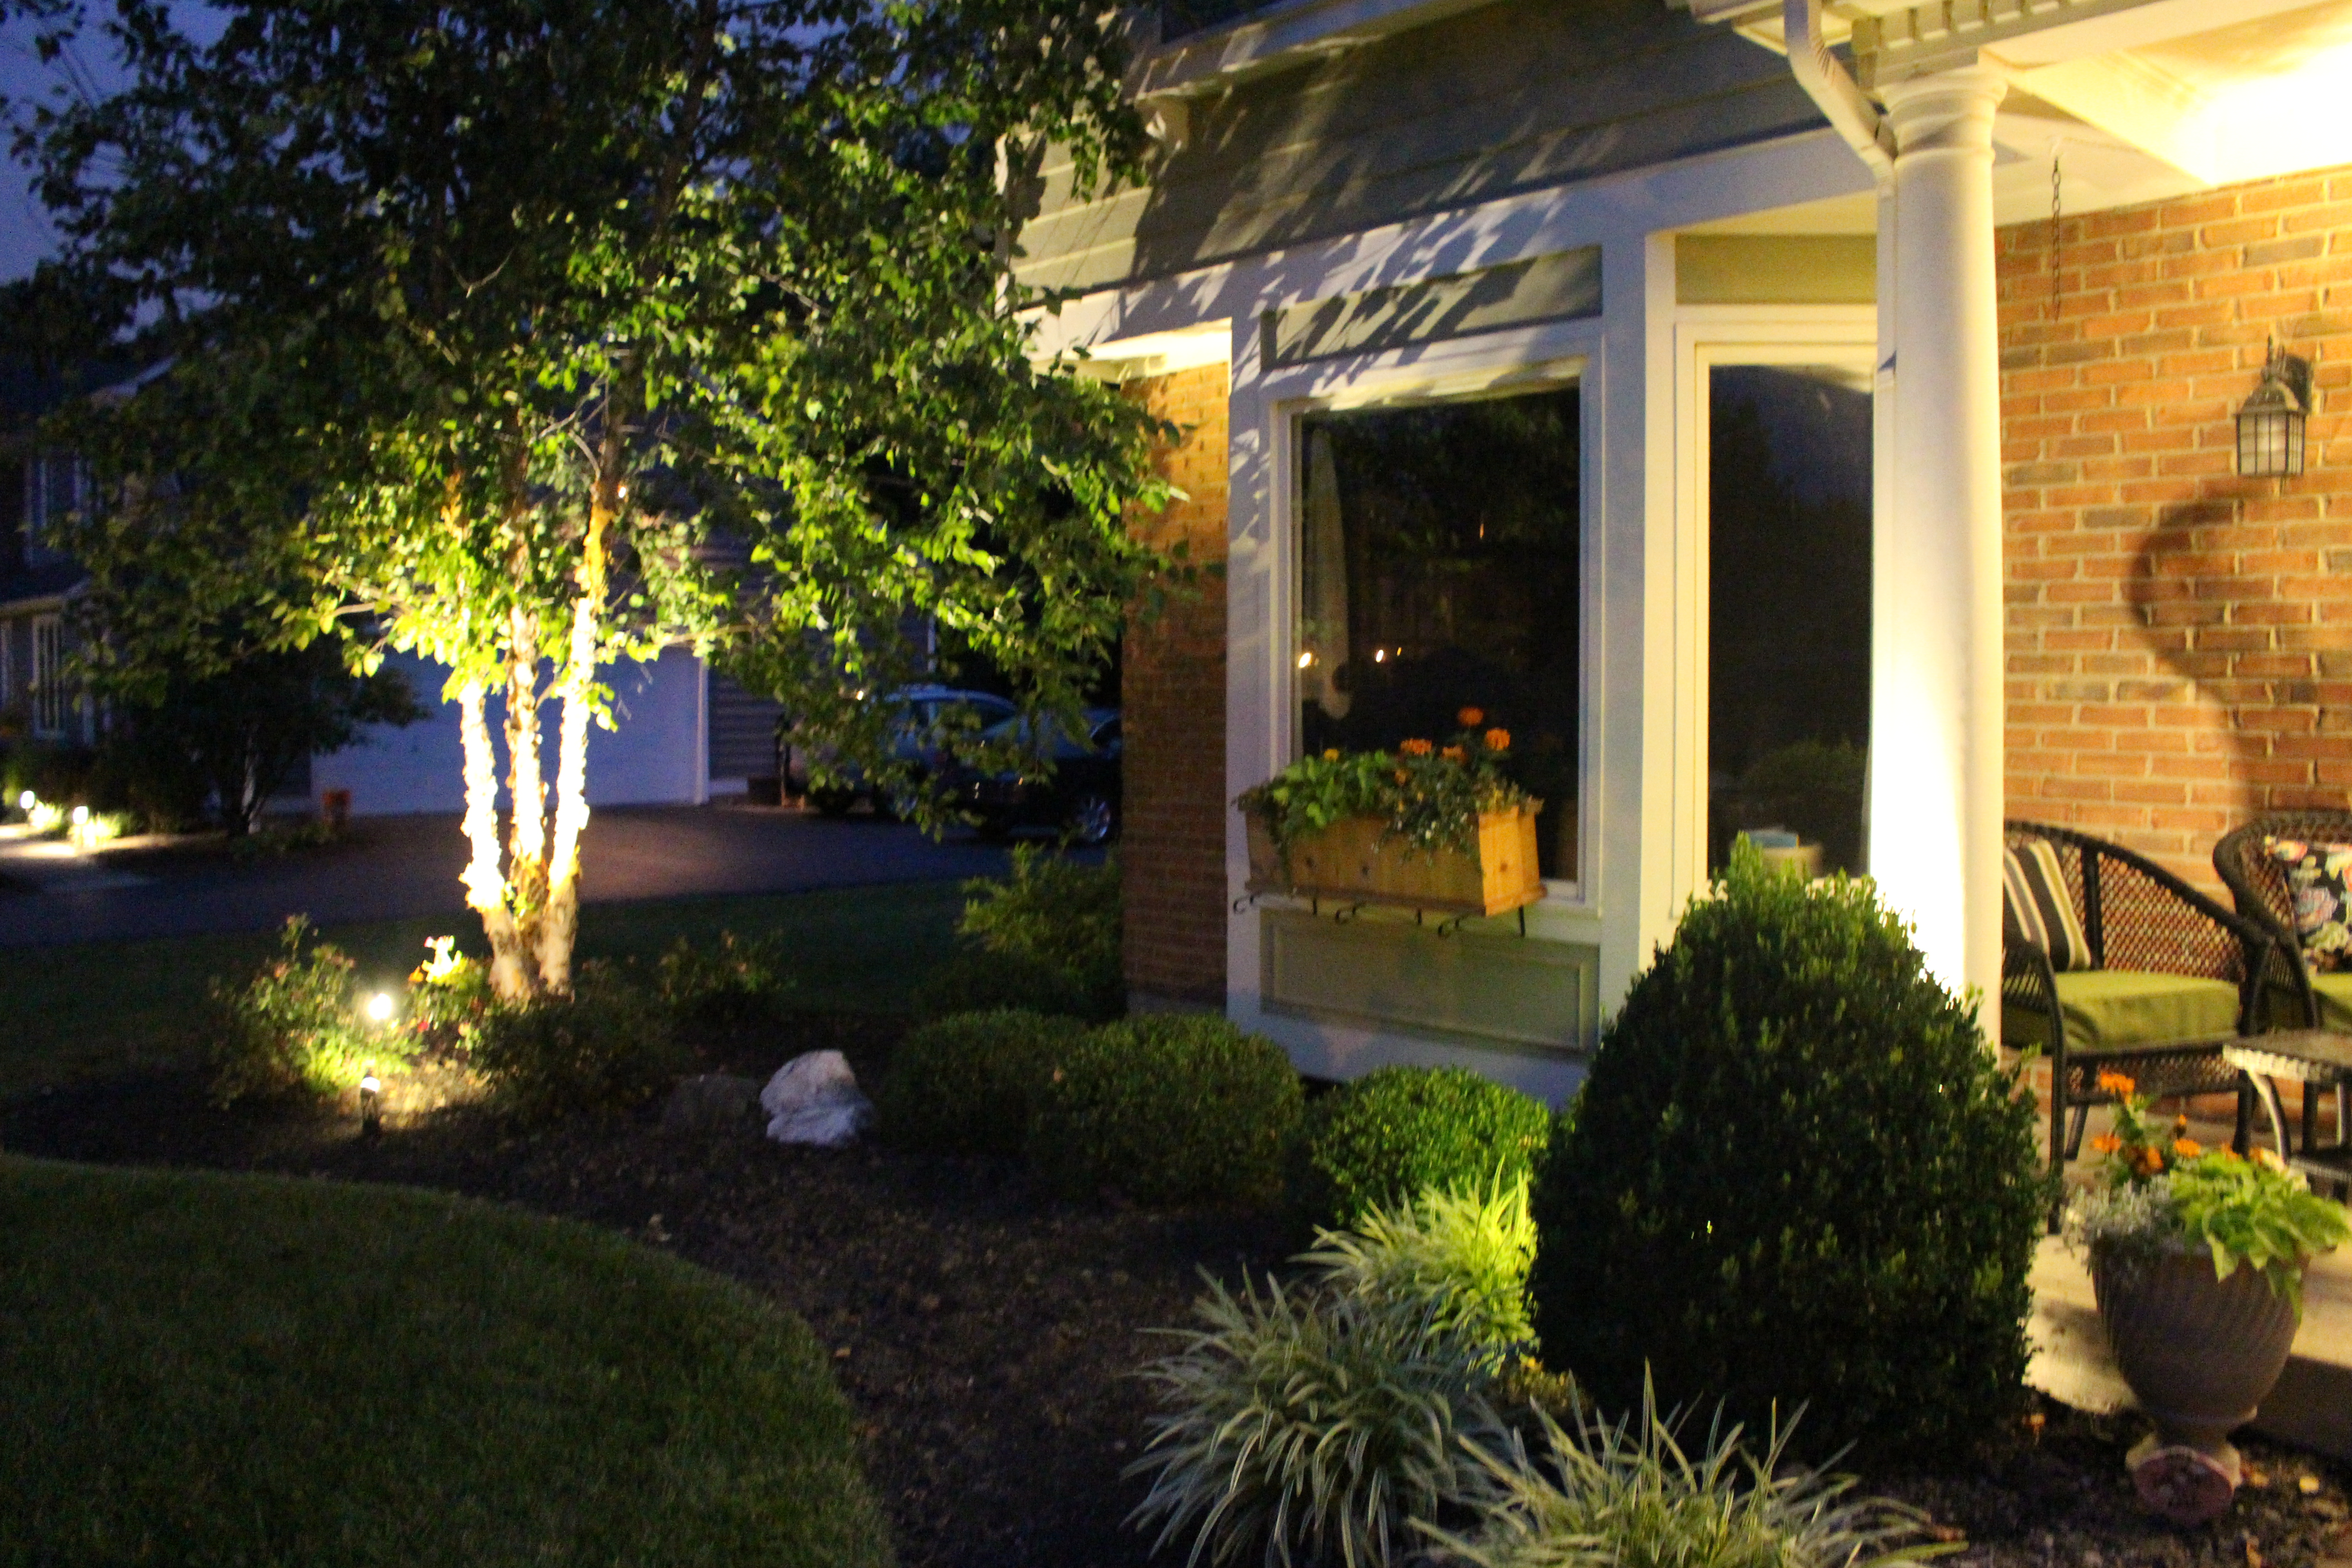 Landscape Lighting Kit from LampsPlus installed for Curb Appeal by www.whitecottagehomeandliving.com